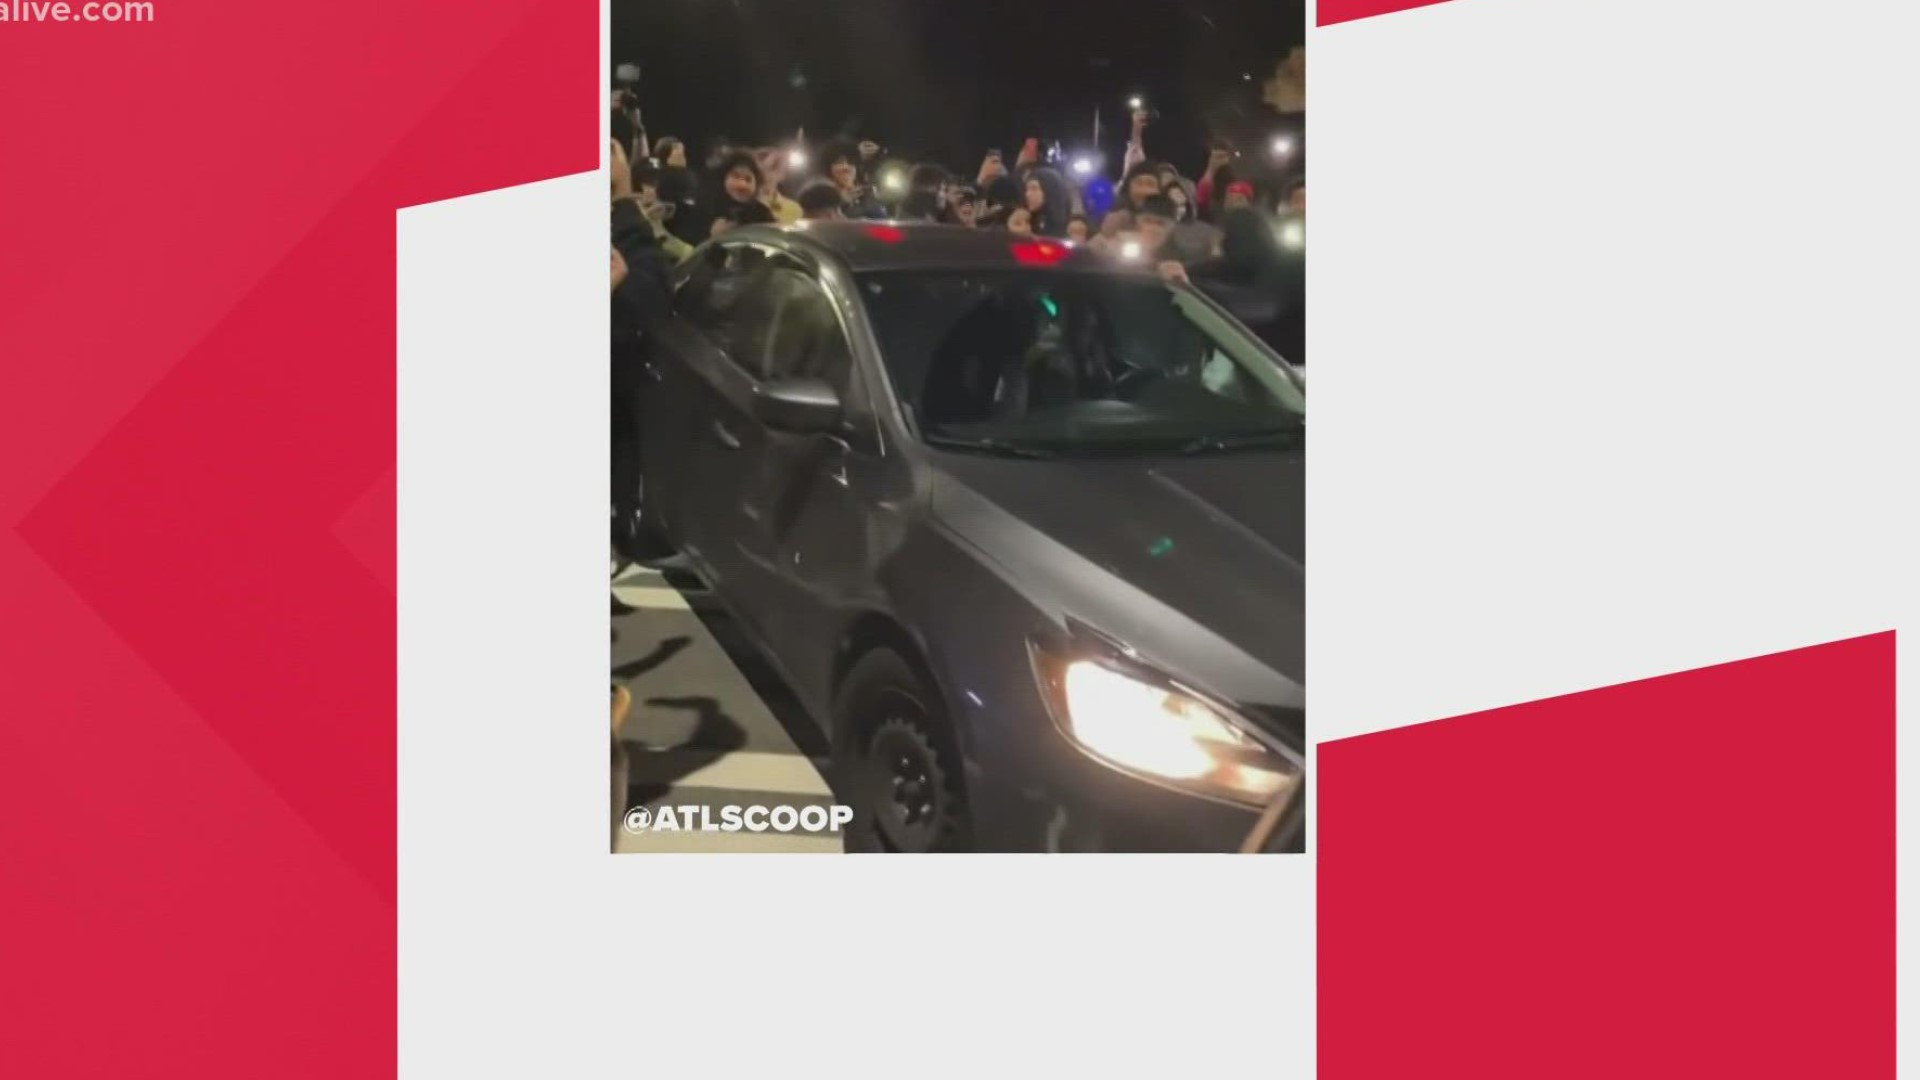 A woman tried to make her way through the intersection during a car meet-up but ended up getting her window smashed.